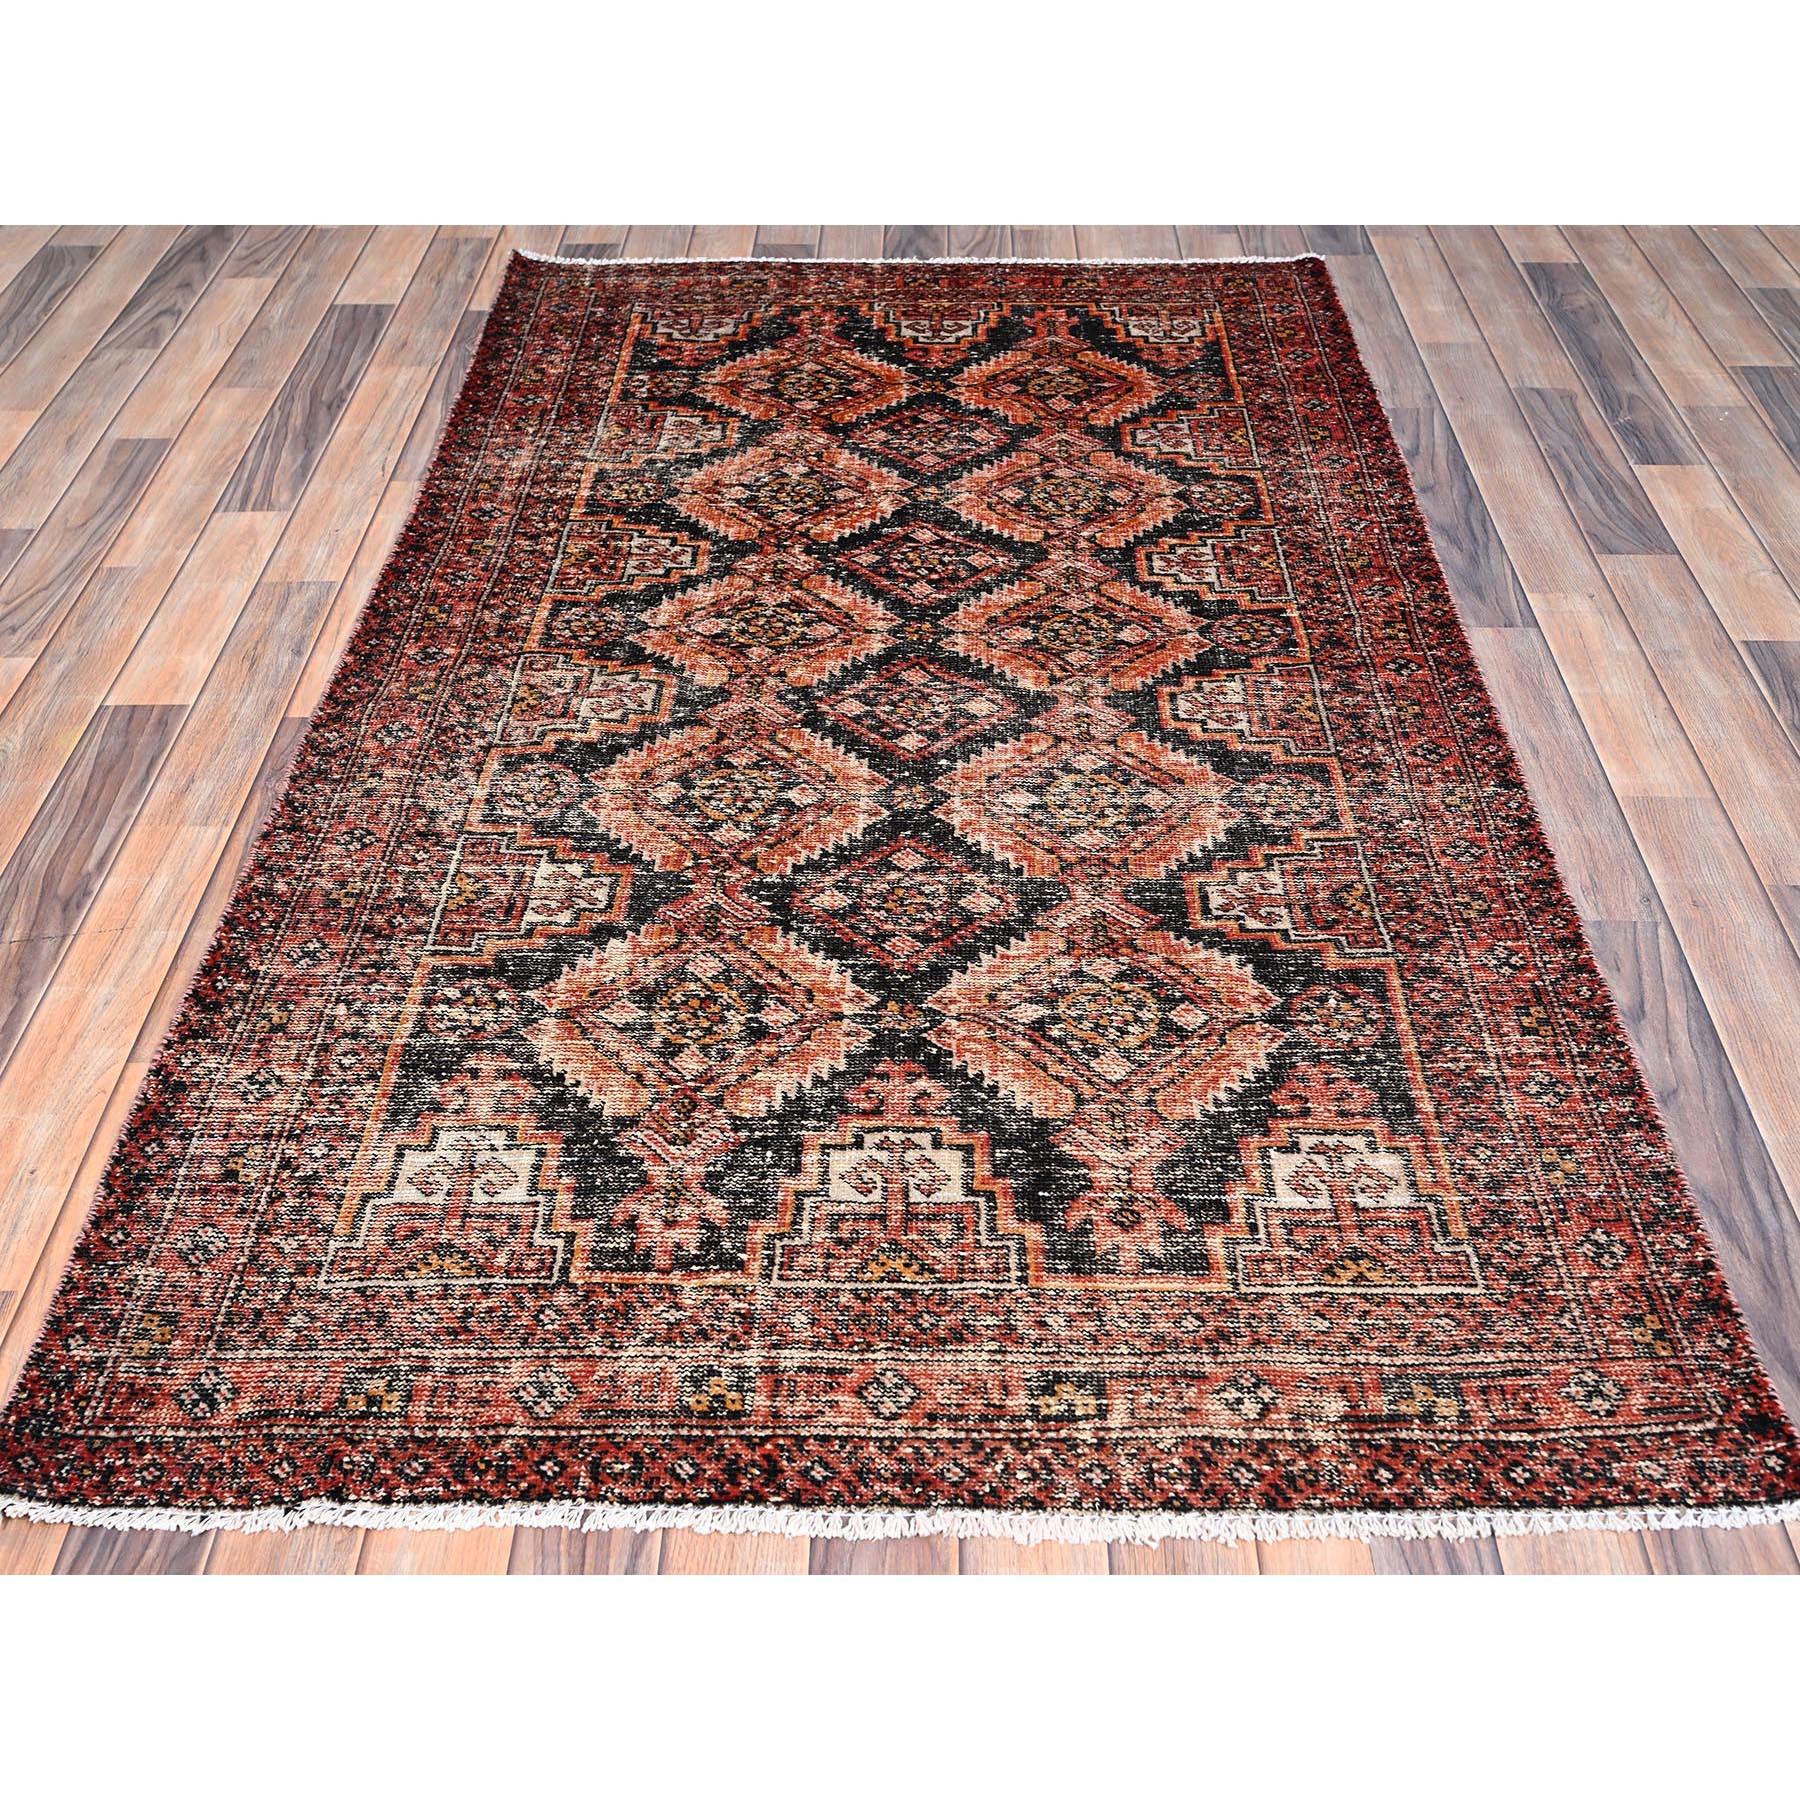 Medieval Red Wool Hand Knotted Vintage Persian Baluch Washed Out Worn Sheared Low Rug For Sale